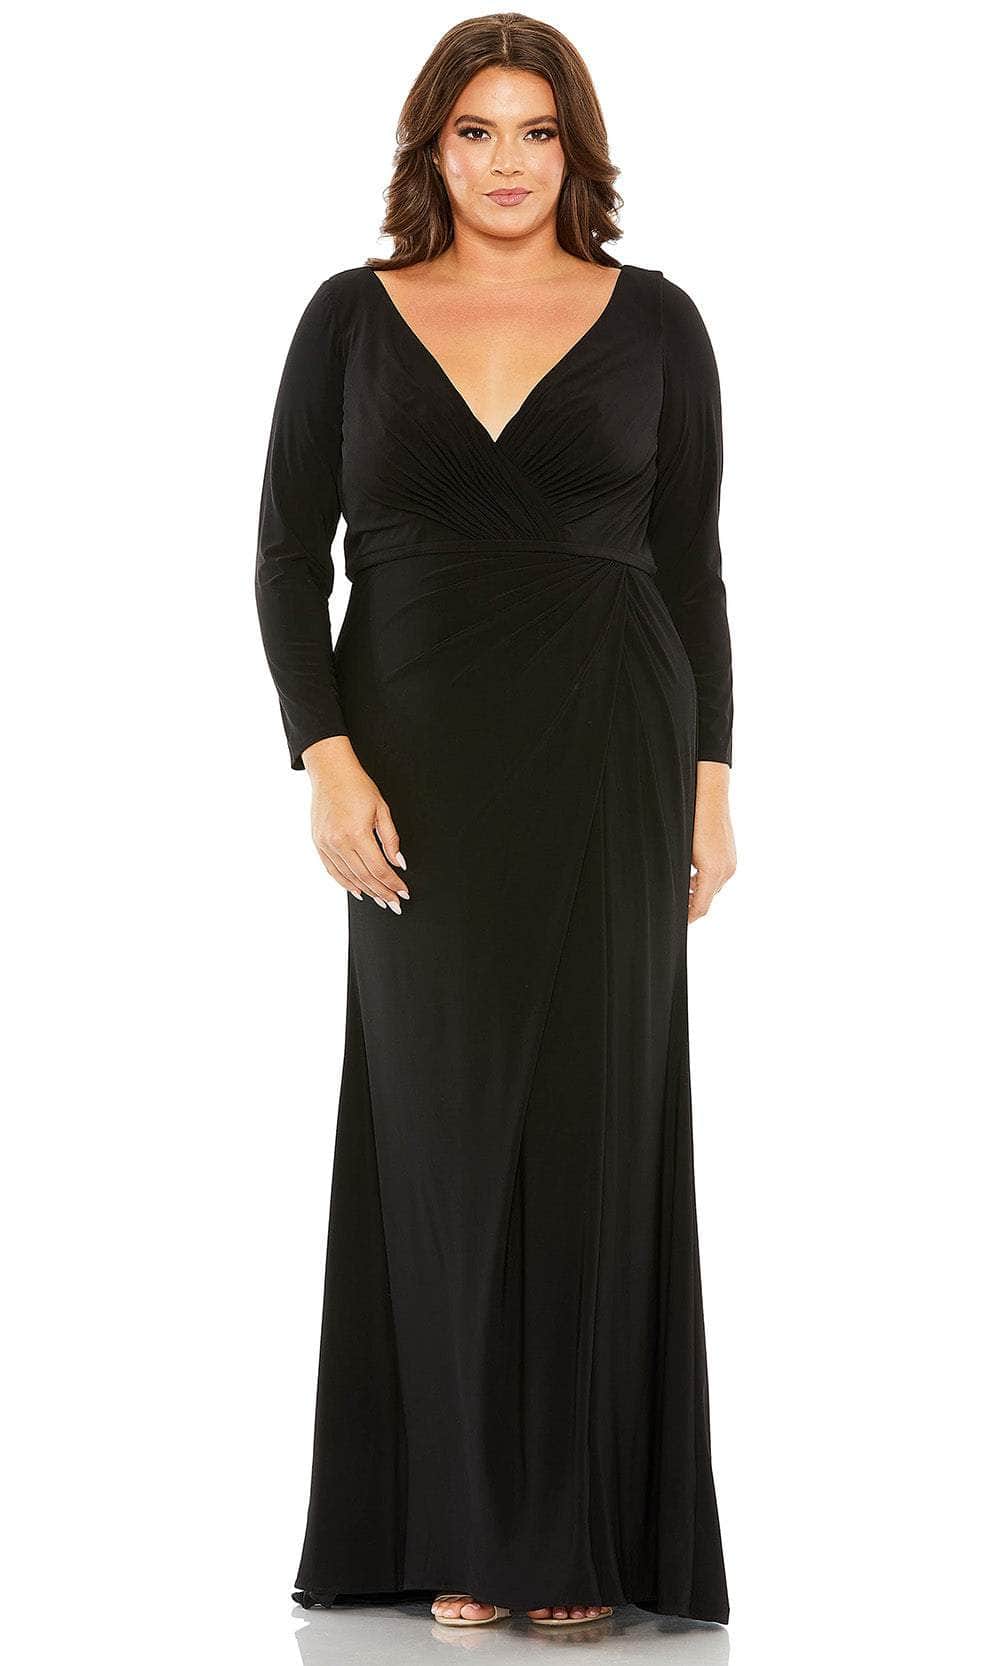 Mac Duggal 68442 - Surplice V-Neck Jersey Prom Gown Special Occasion Dress 14W / Black